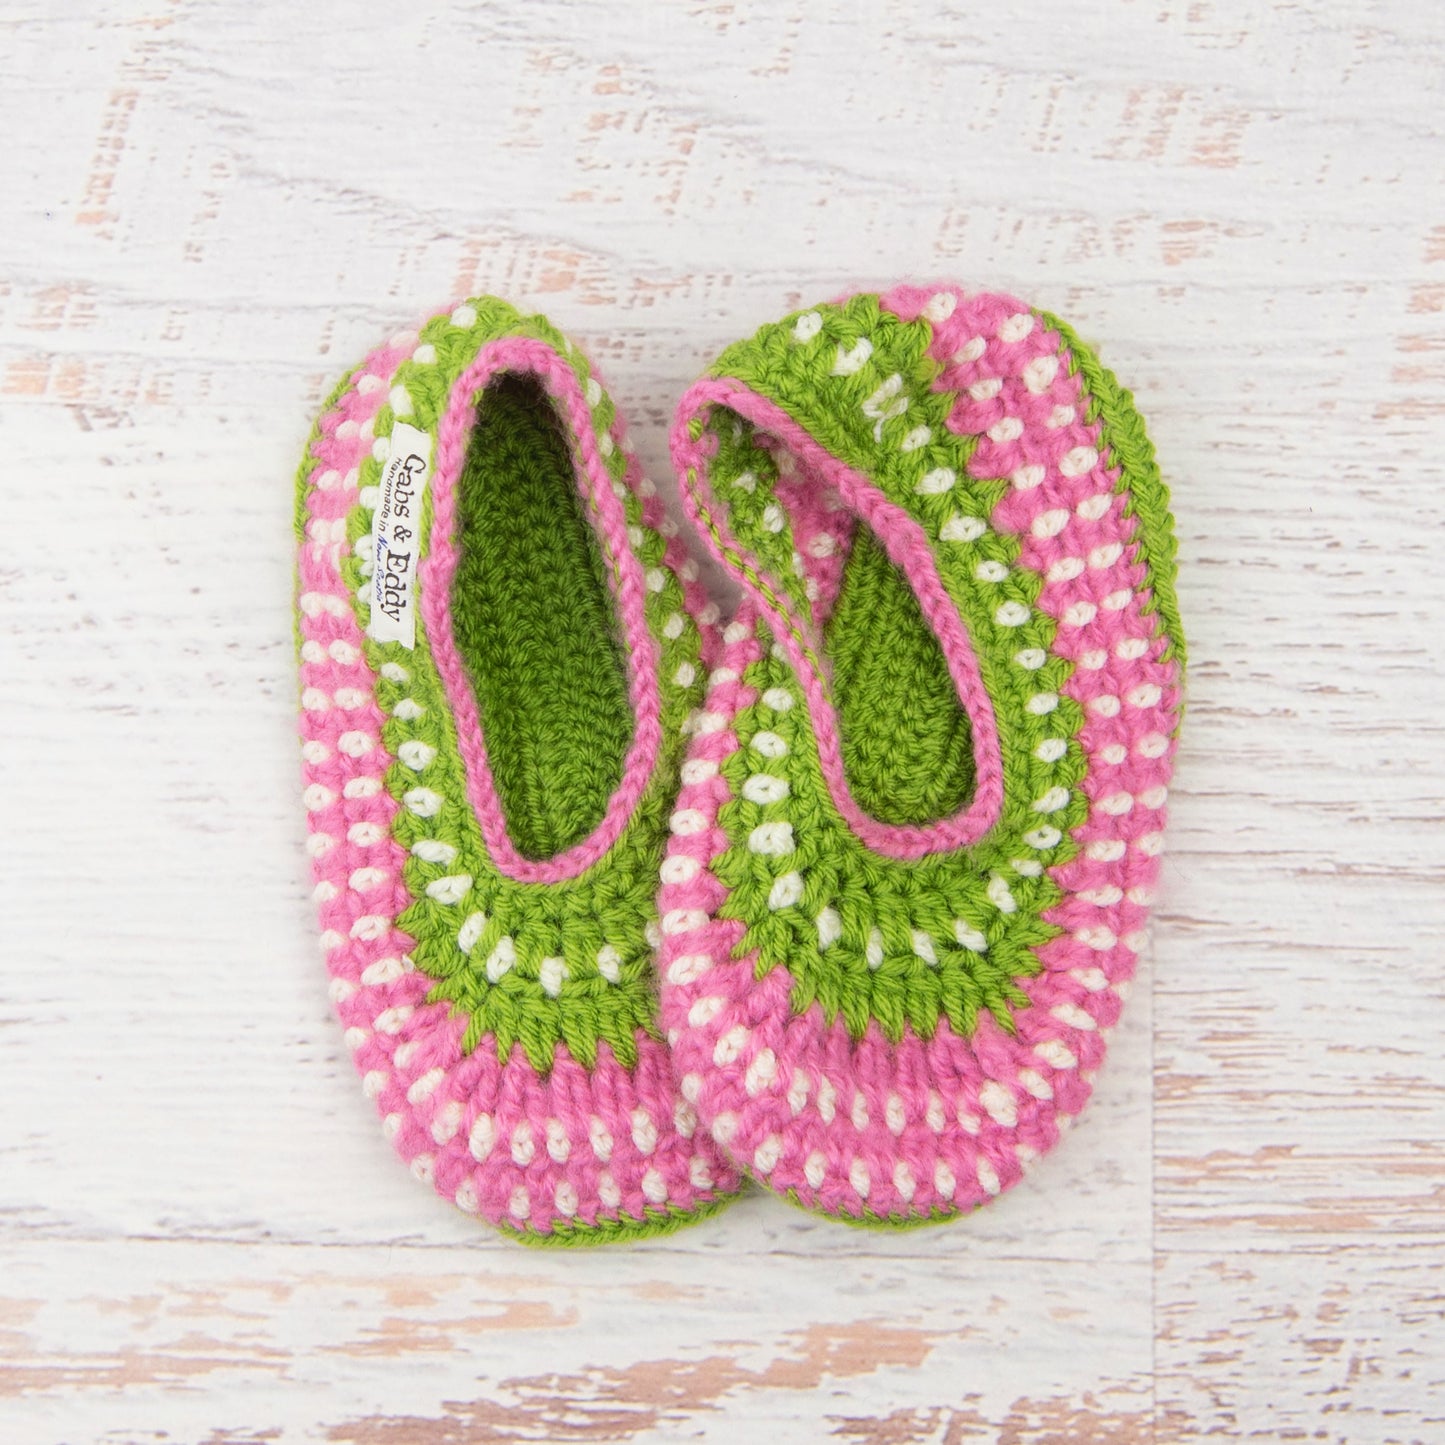 Ladies Size 7/8 Multi Colour Slippers in Pink, Fern and Fisherman